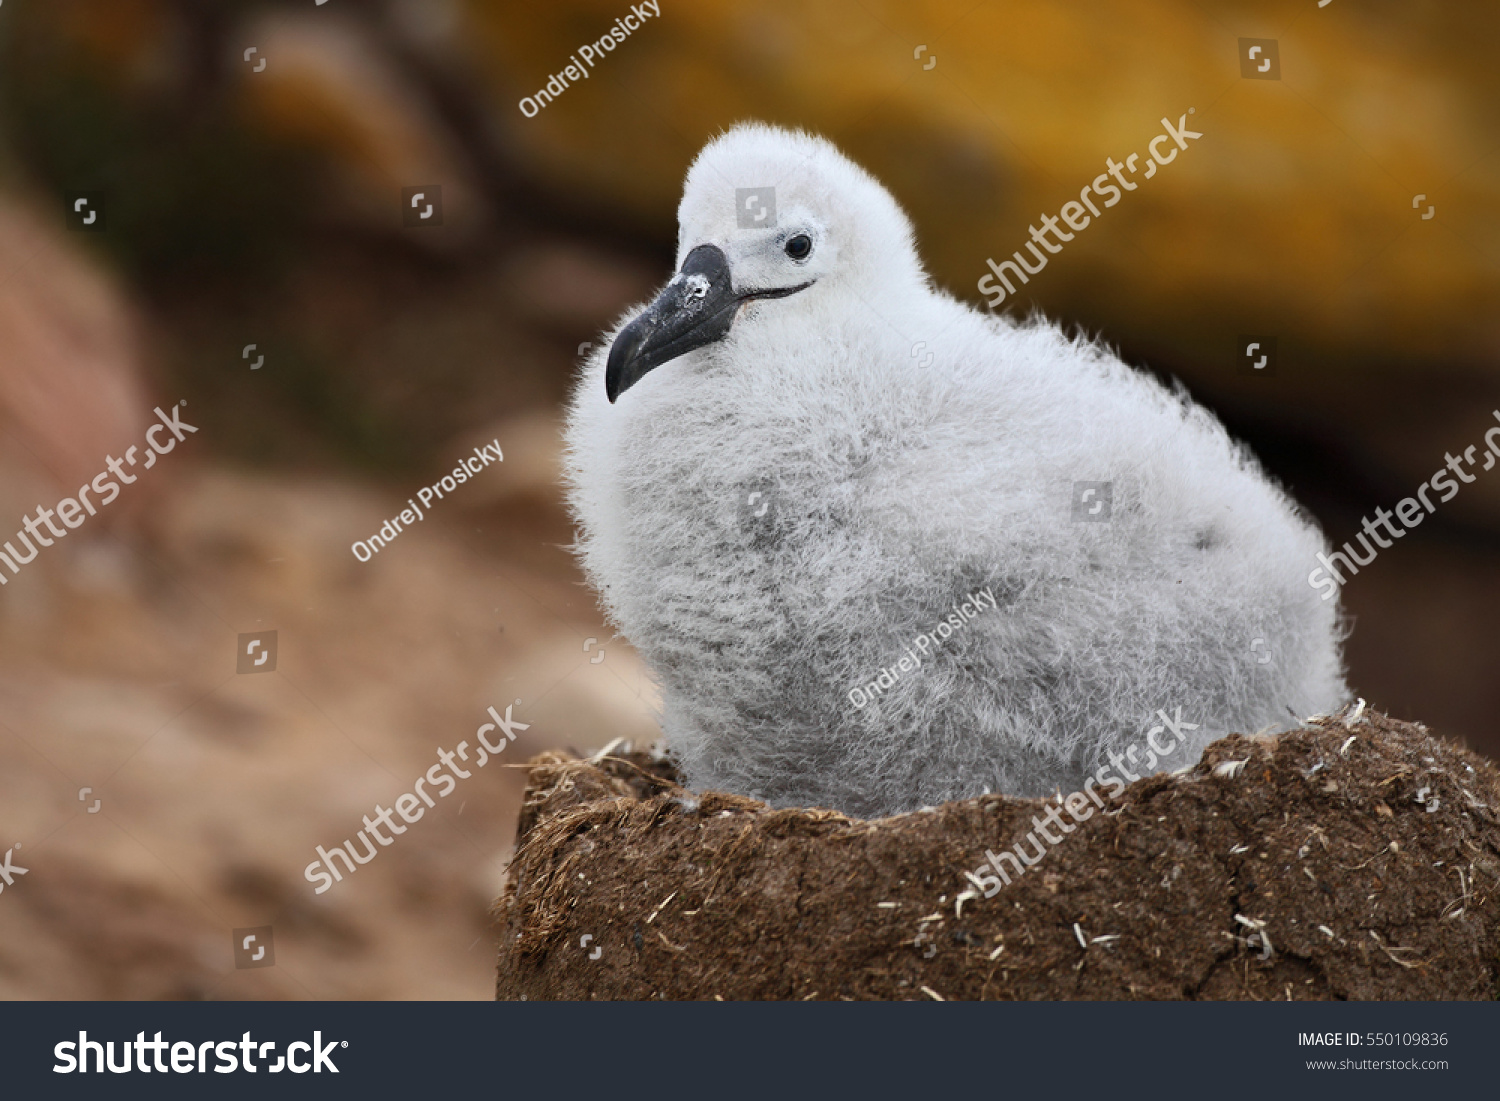 Cute baby of Black-browed albatross, Thalassarche melanophris, sitting on clay nest on the Falkland Islands. Wildlife scene in the nature. #550109836